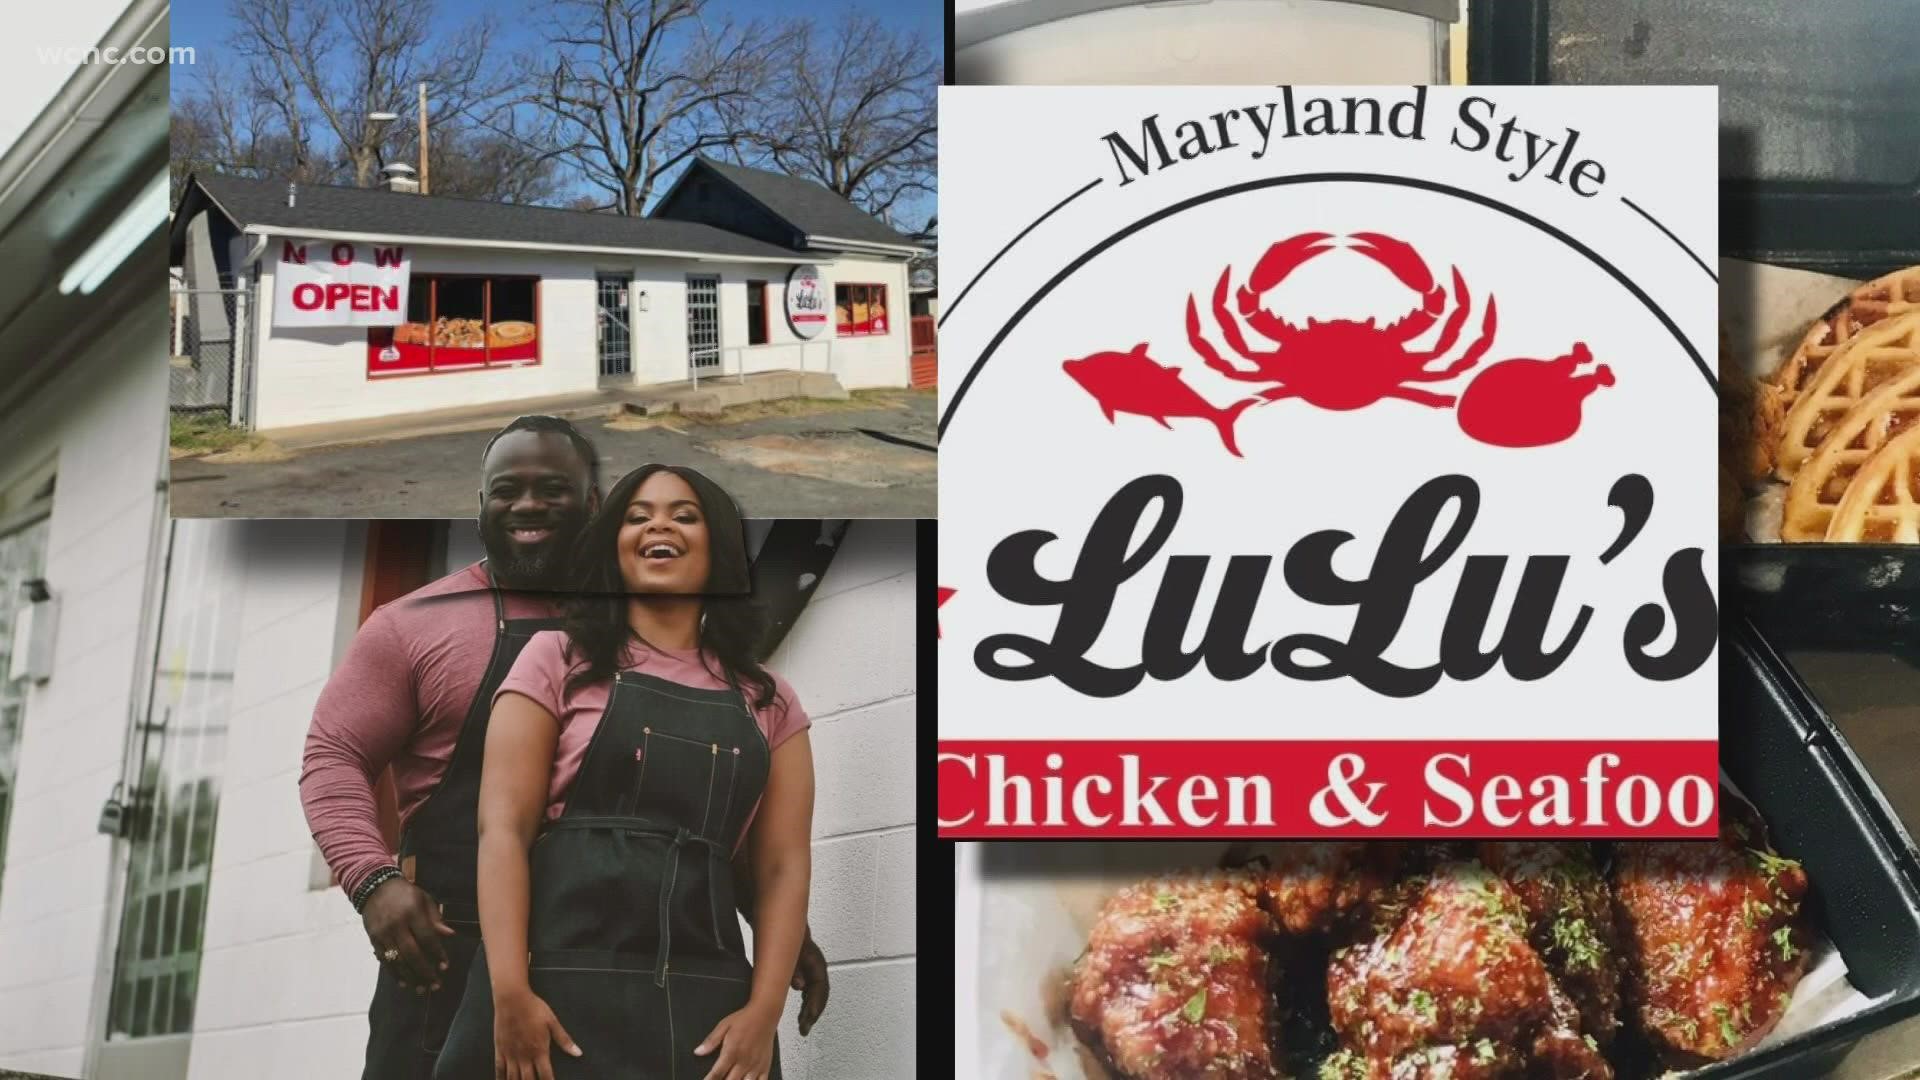 The husband and wife owners of Lulu’s Maryland Style Chicken and Seafood faced one hurdle after another trying to open their second location.